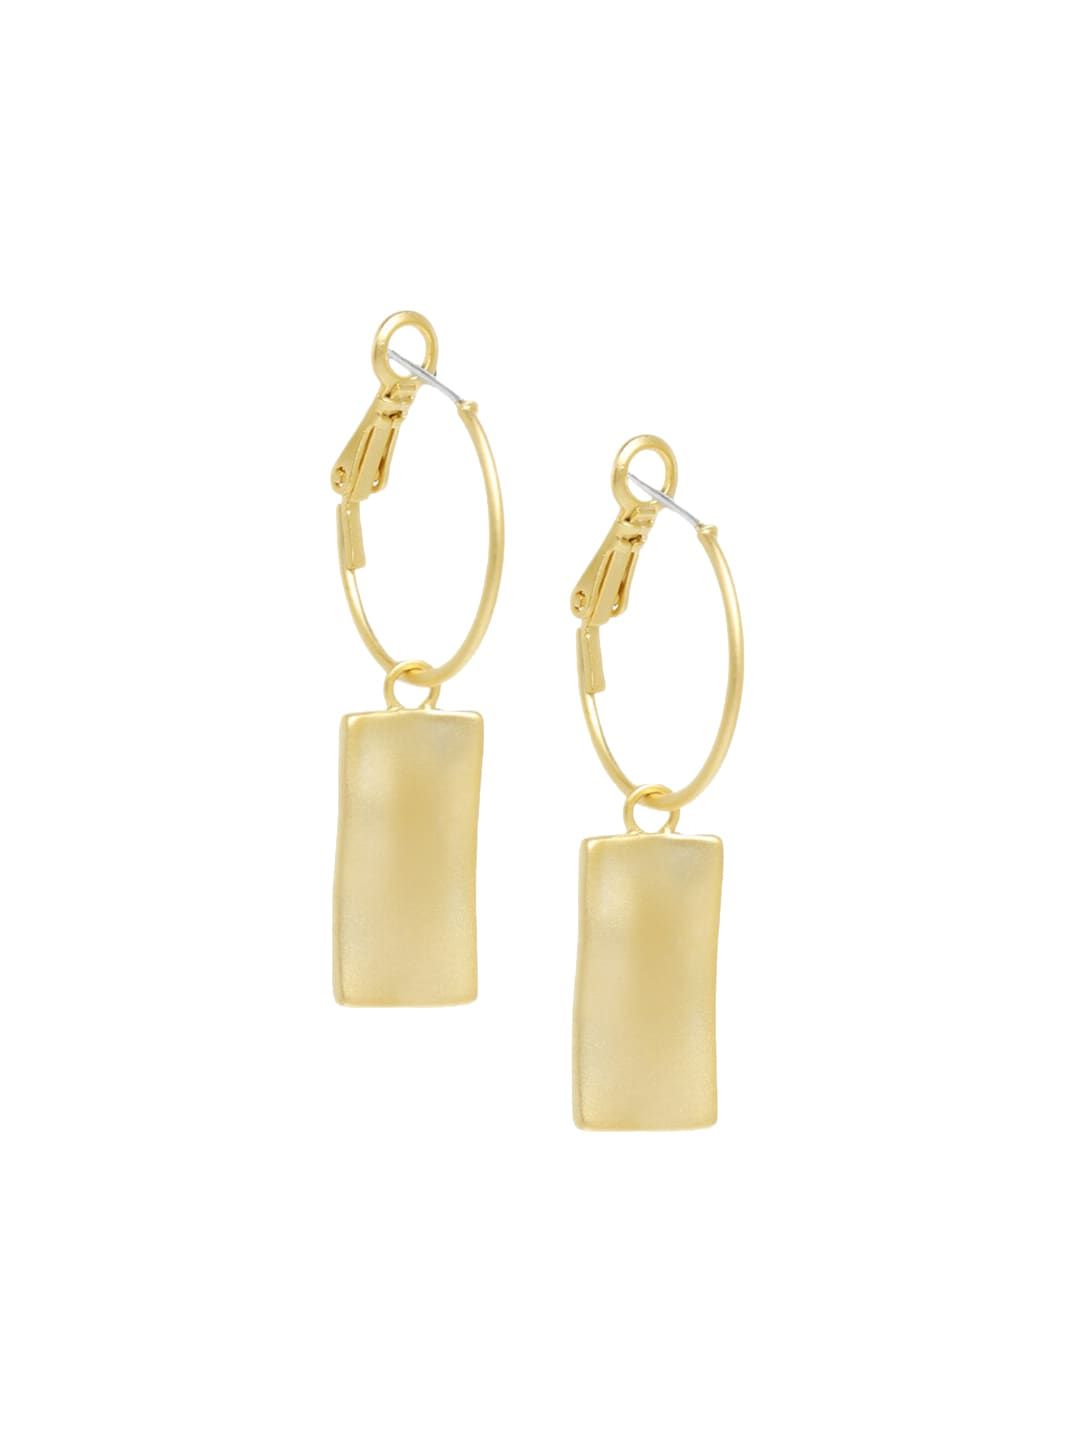 Mikoto by FableStreet Gold-Toned Geometric Half Hoop Earrings Price in India